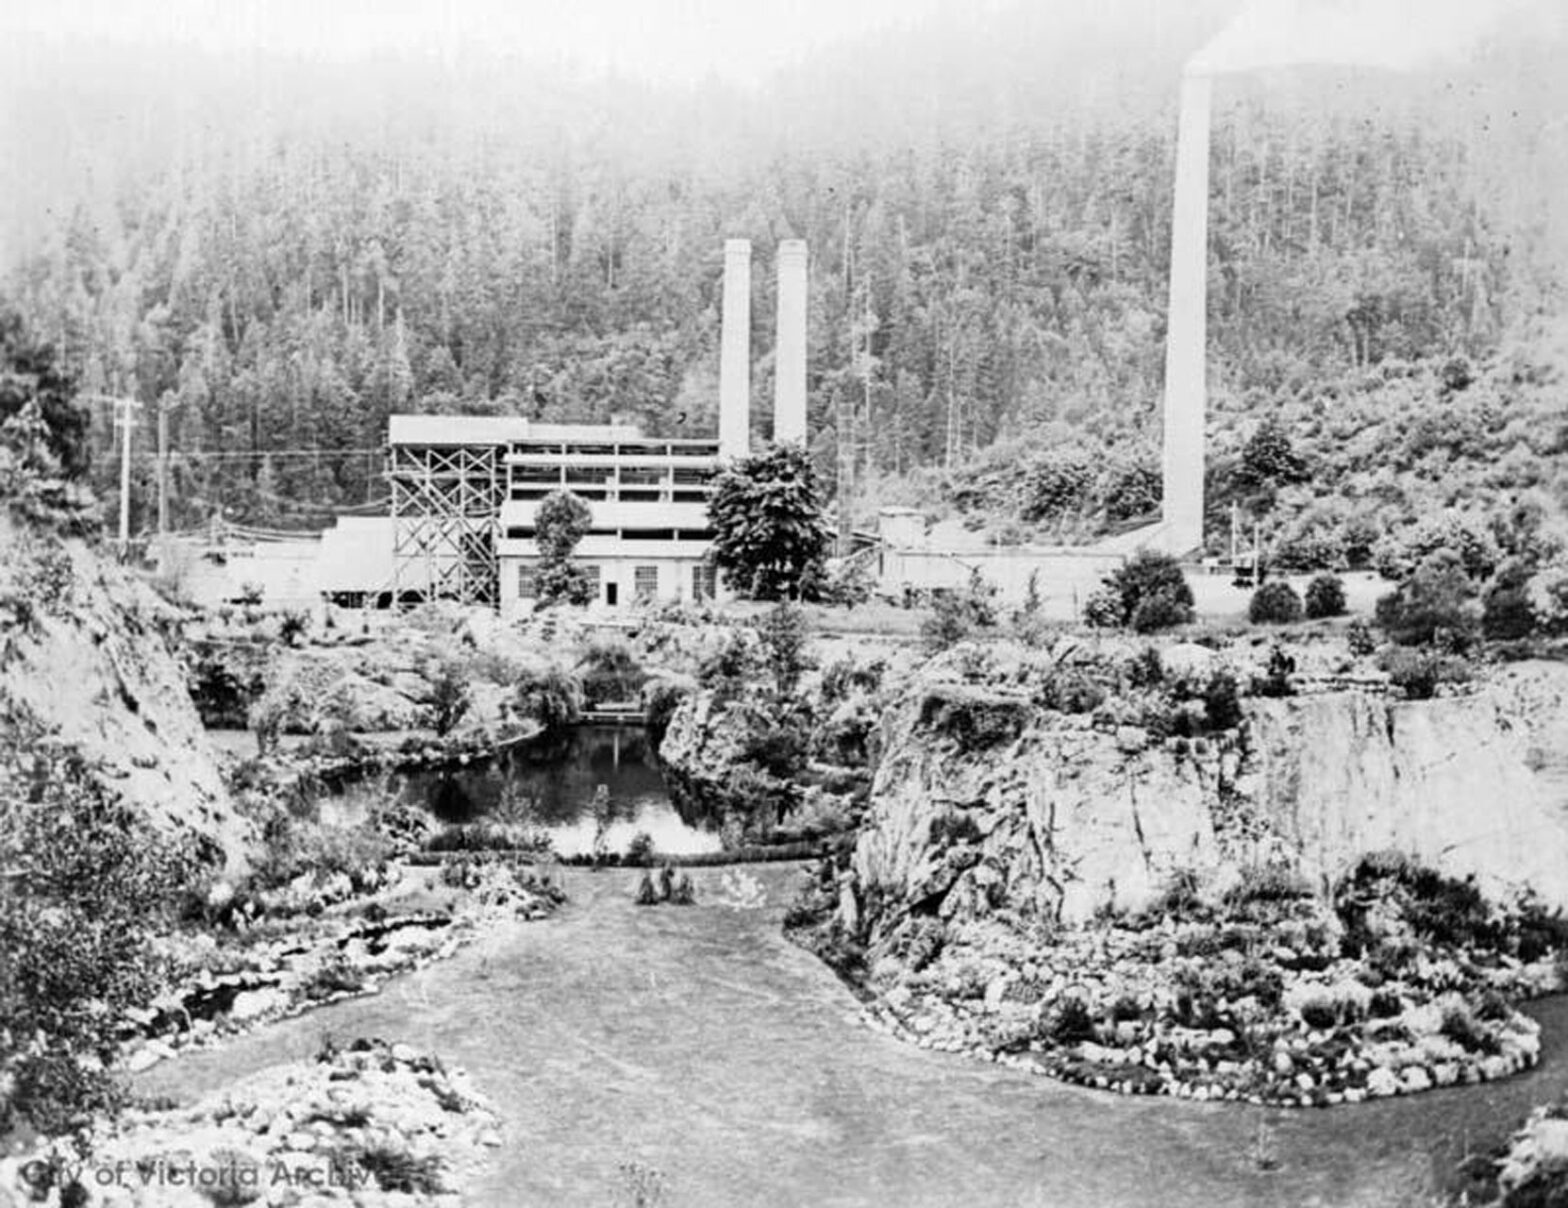 The Vancouver Portland Cement Company plant above the Sunken Garden, the Mound and the Trout Pond, circa 1919 (City of Victoria Archives photo M00805)